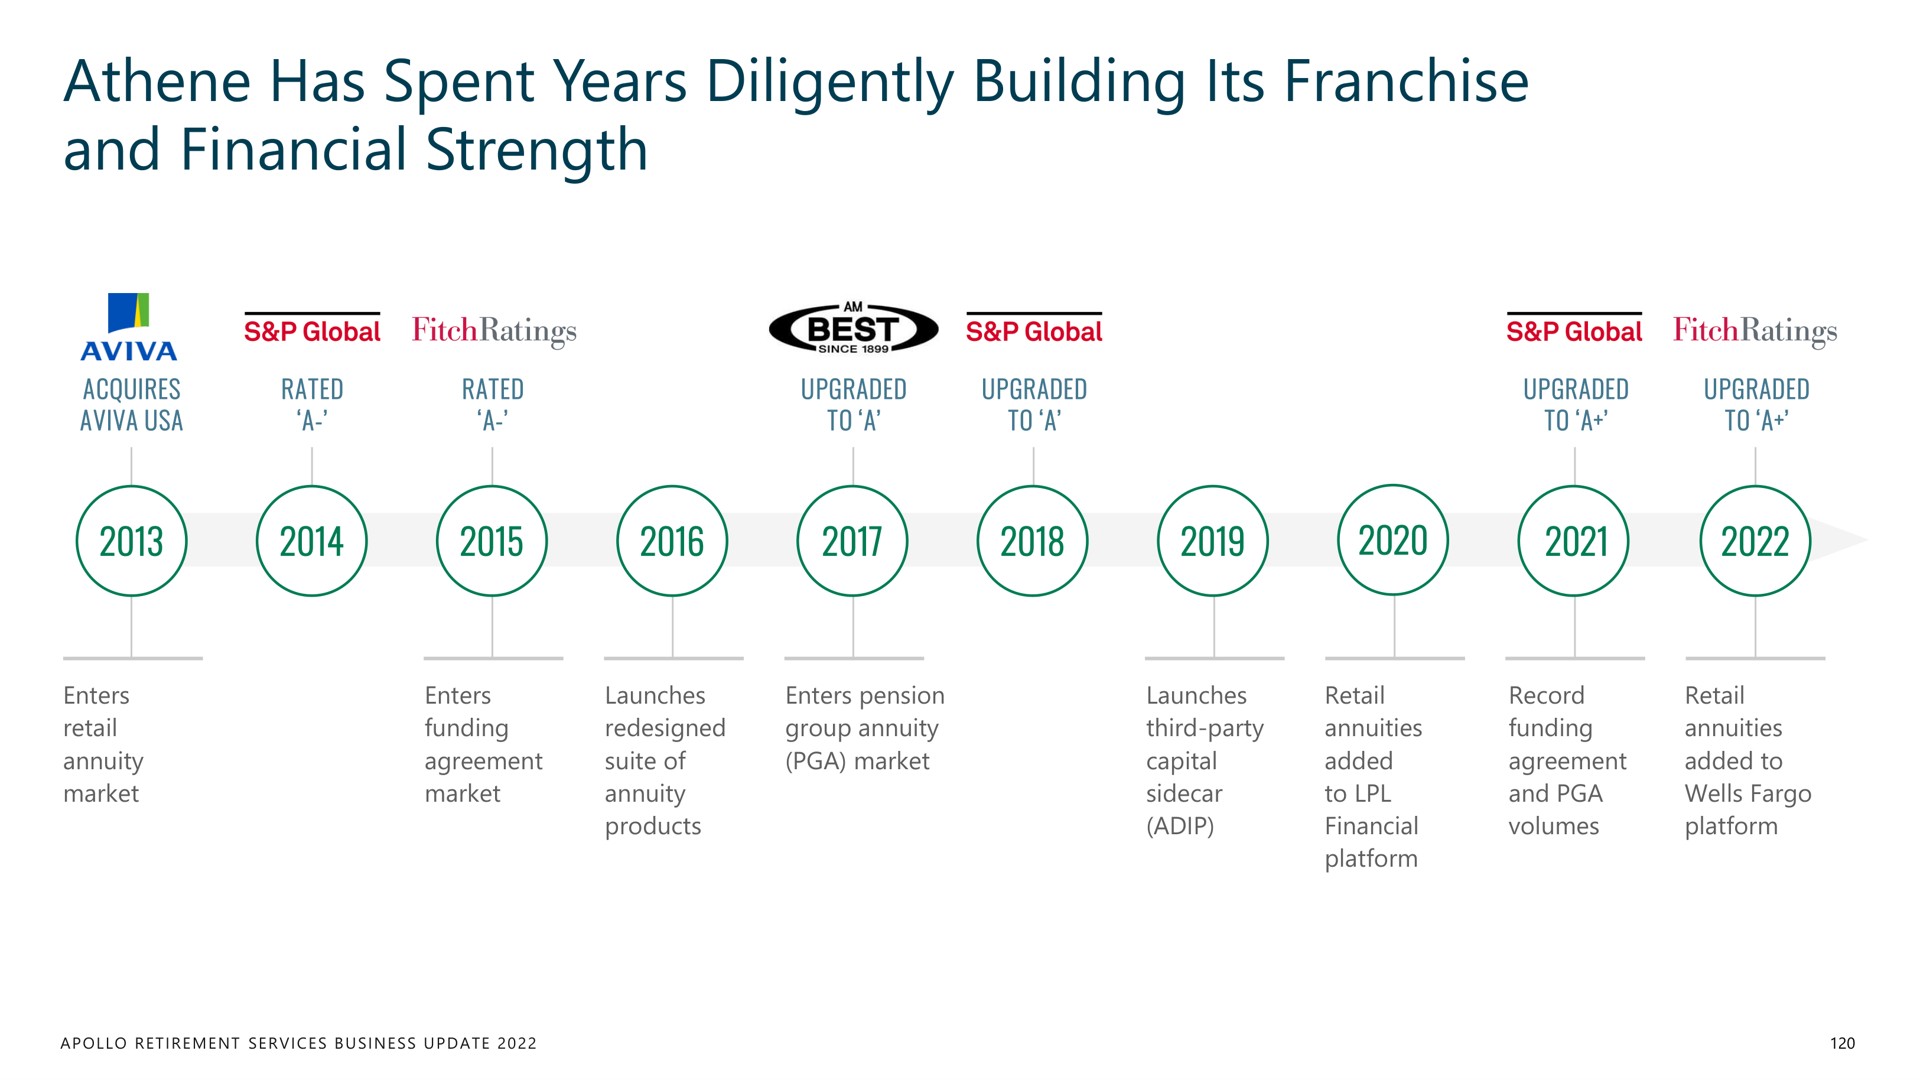 has spent years diligently building its franchise and financial strength | Apollo Global Management